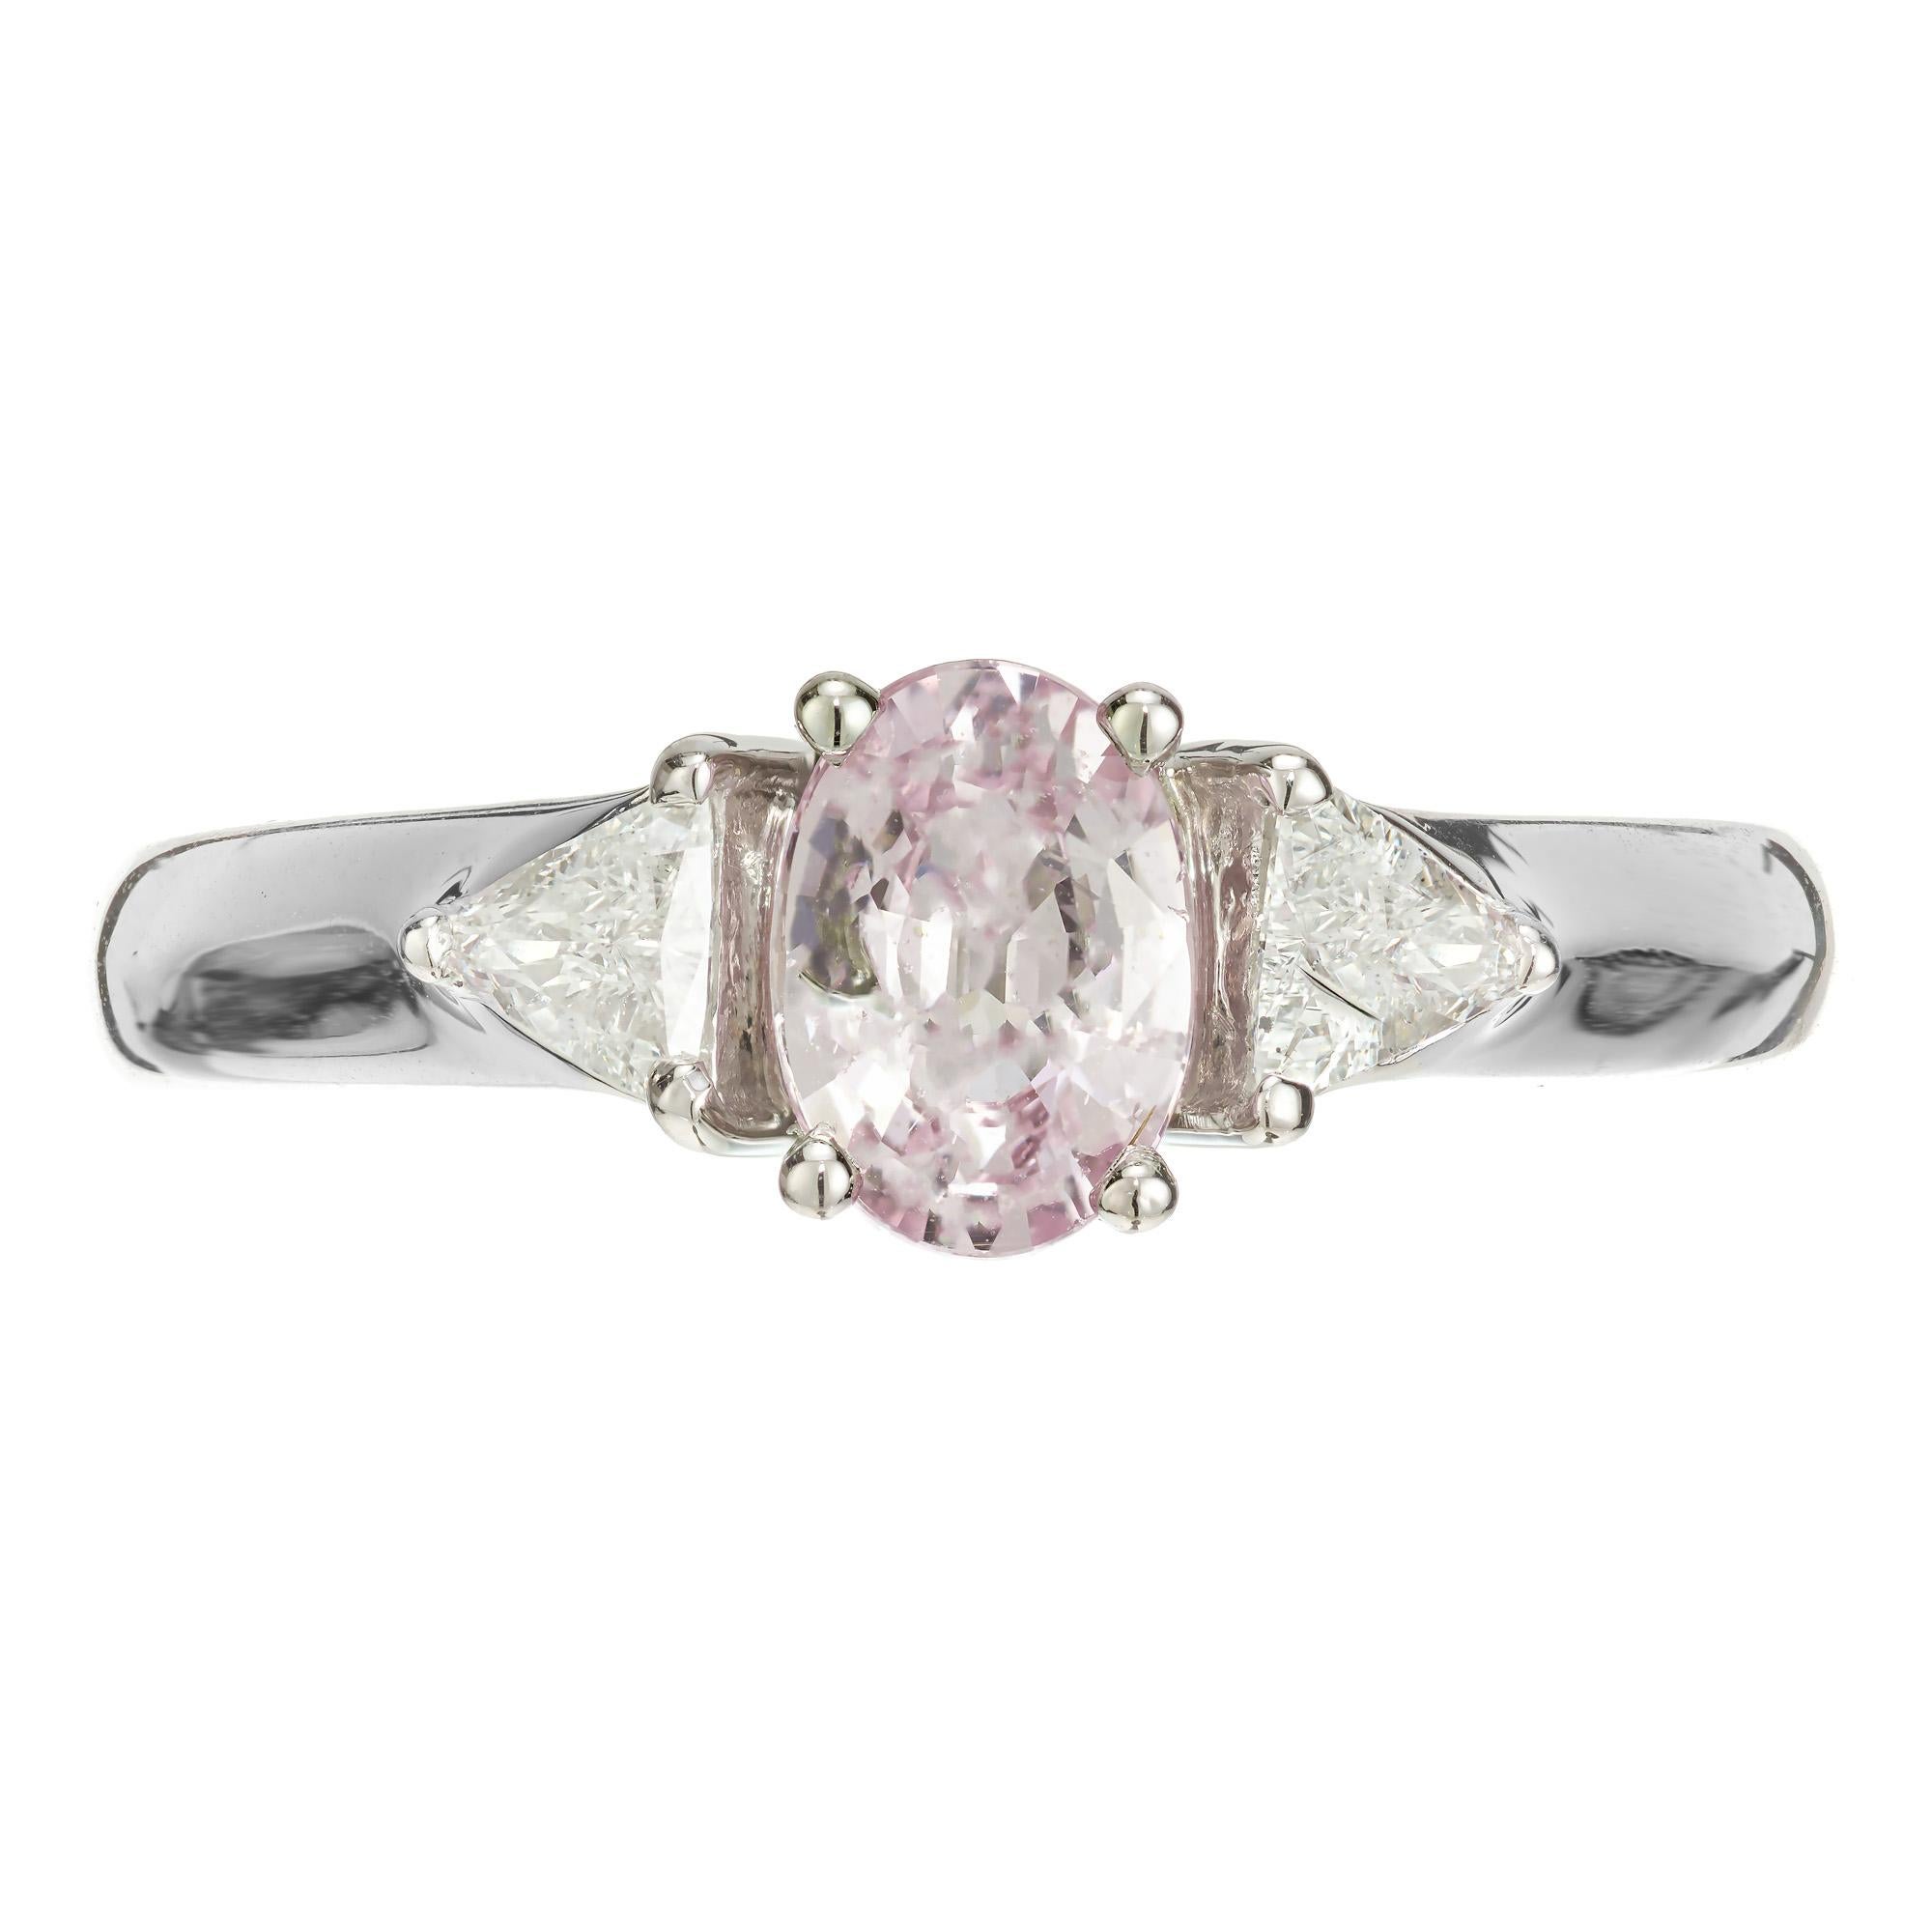 Pink sapphire and diamond engagement ring. GIA certified oval natural light pink/purple center sapphire with two trilliant cut side diamonds, set in a three-stone platinum setting marked NK. We are not familiar with this maker.

1 oval light pinkish